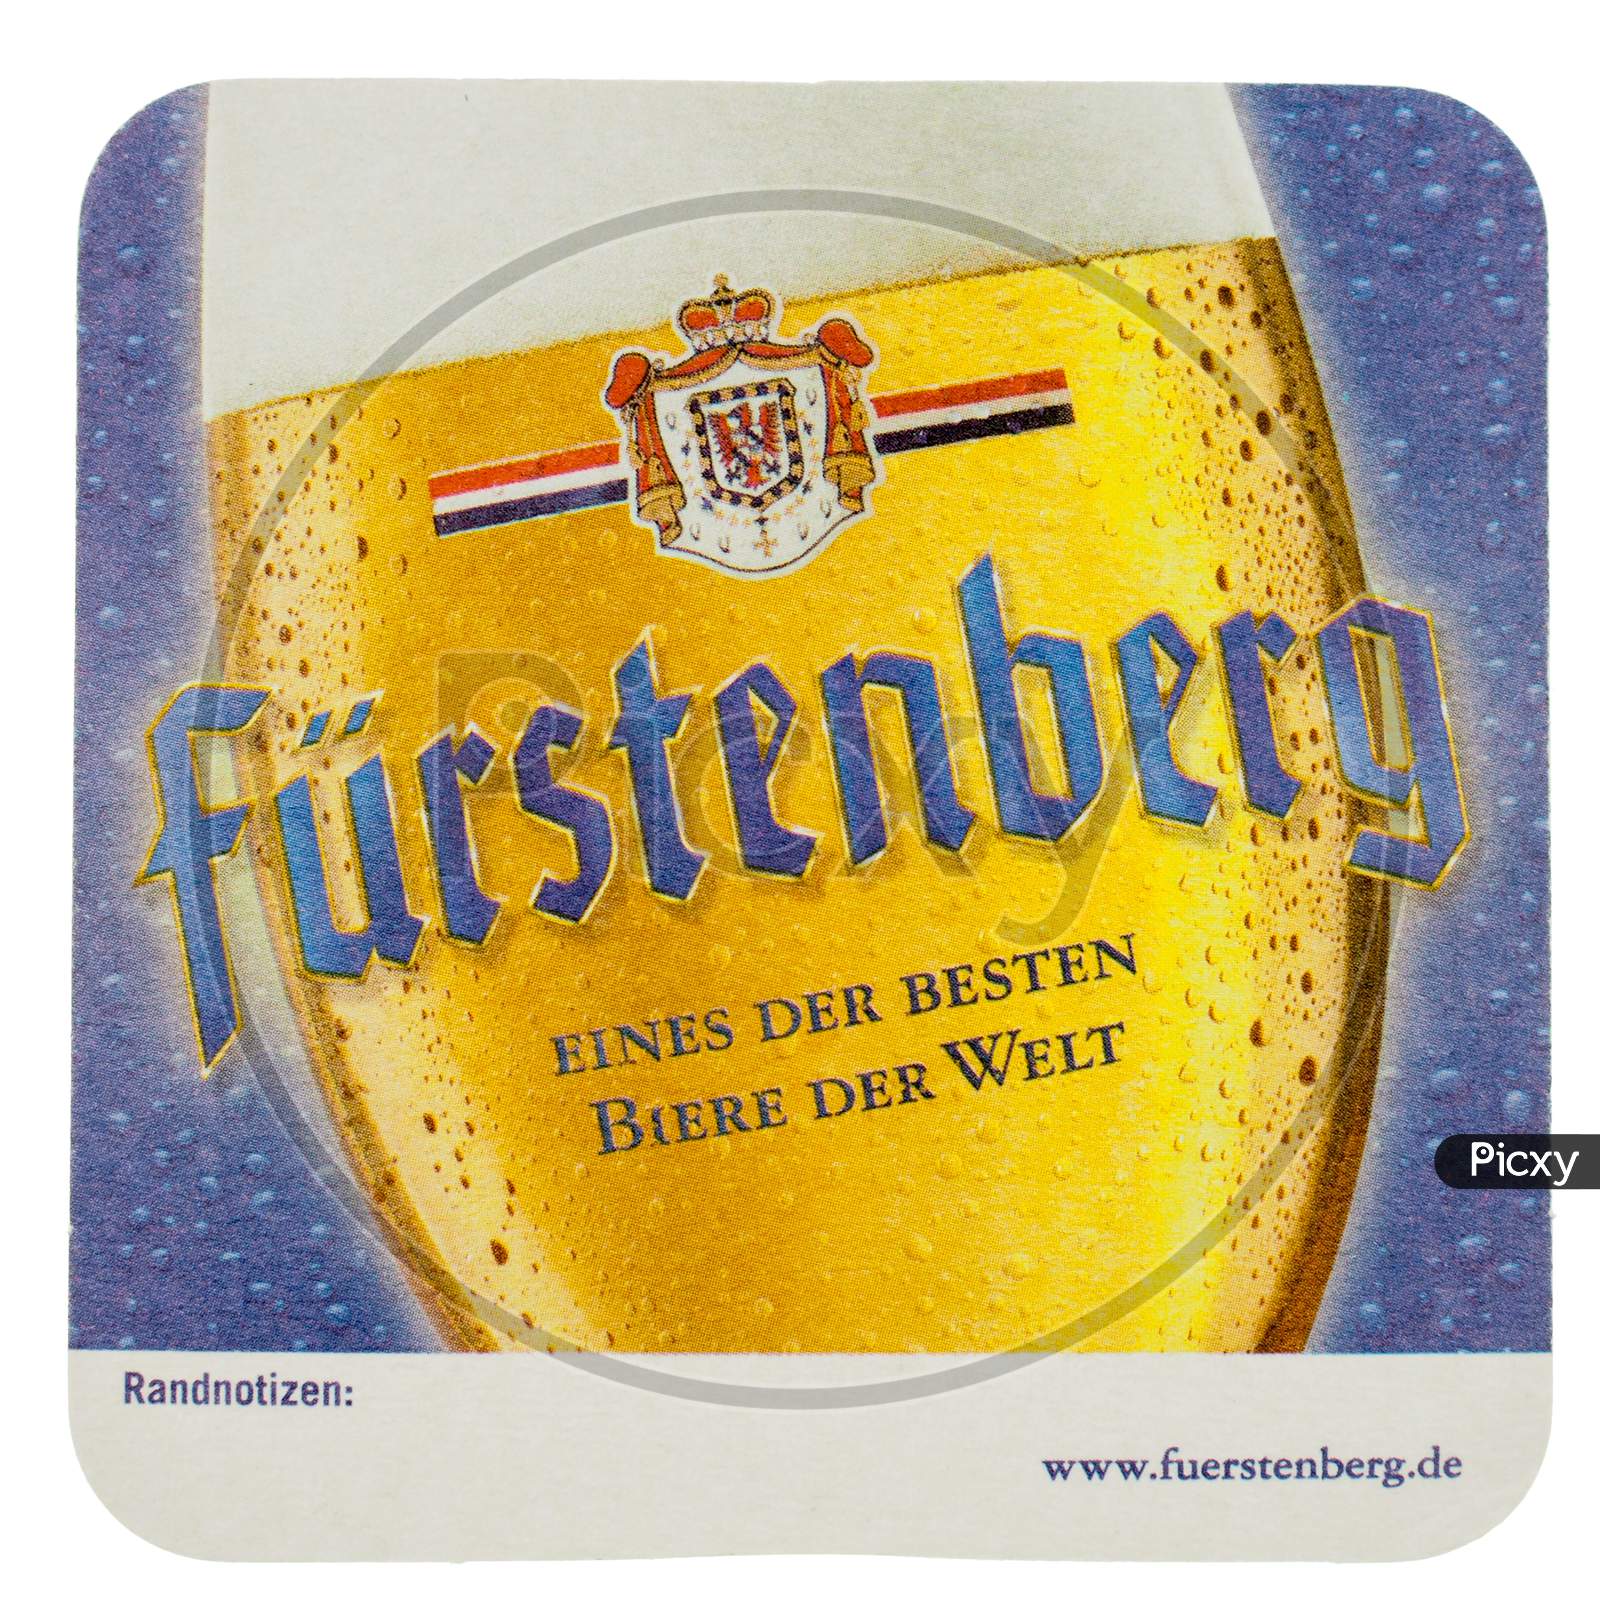 Berlin, Germany - March 15, 2015: Beermat Of German Beer Fuerstenberg Isolated Over White Background